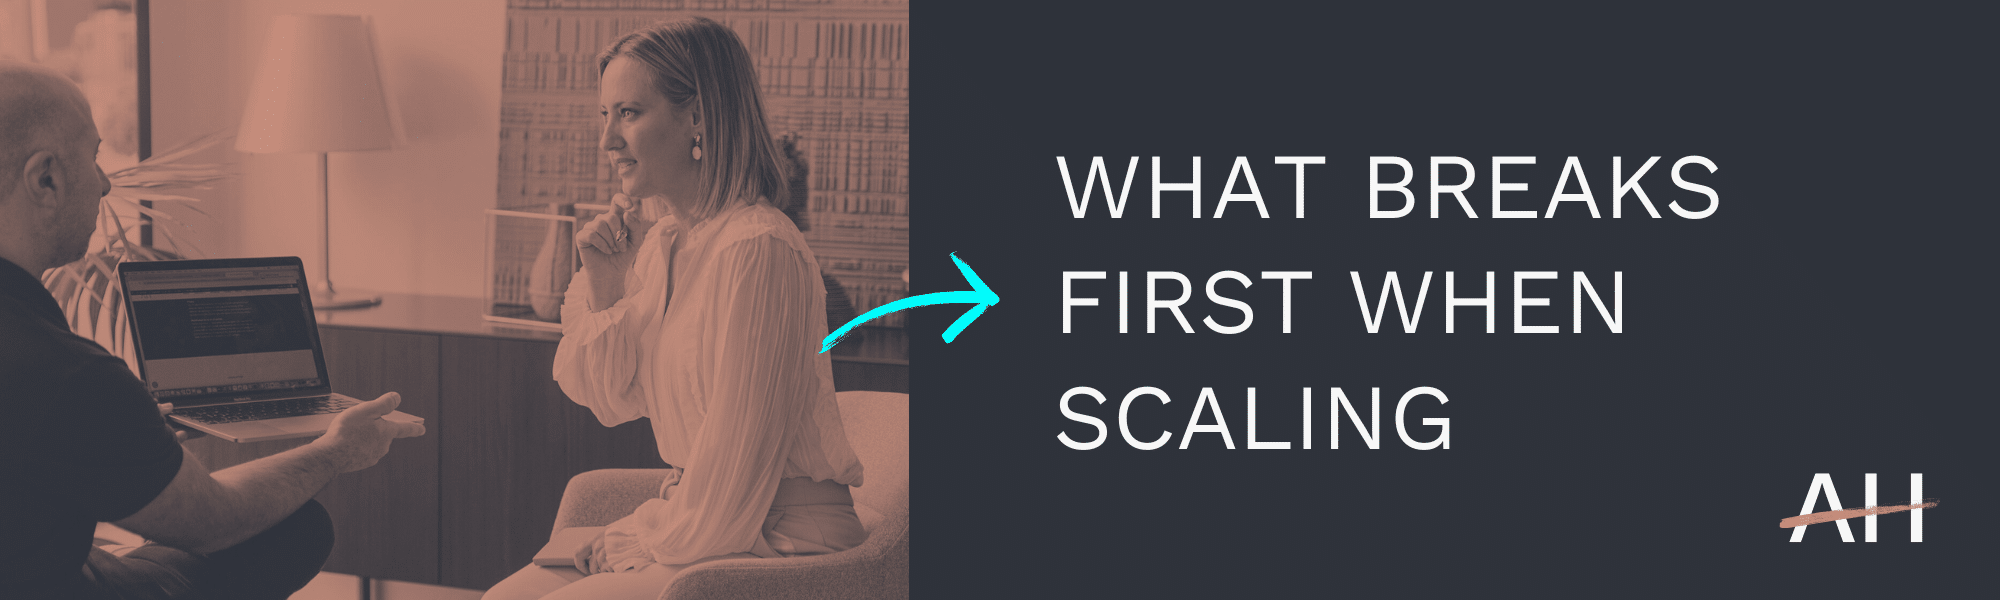 What breaks first when scaling